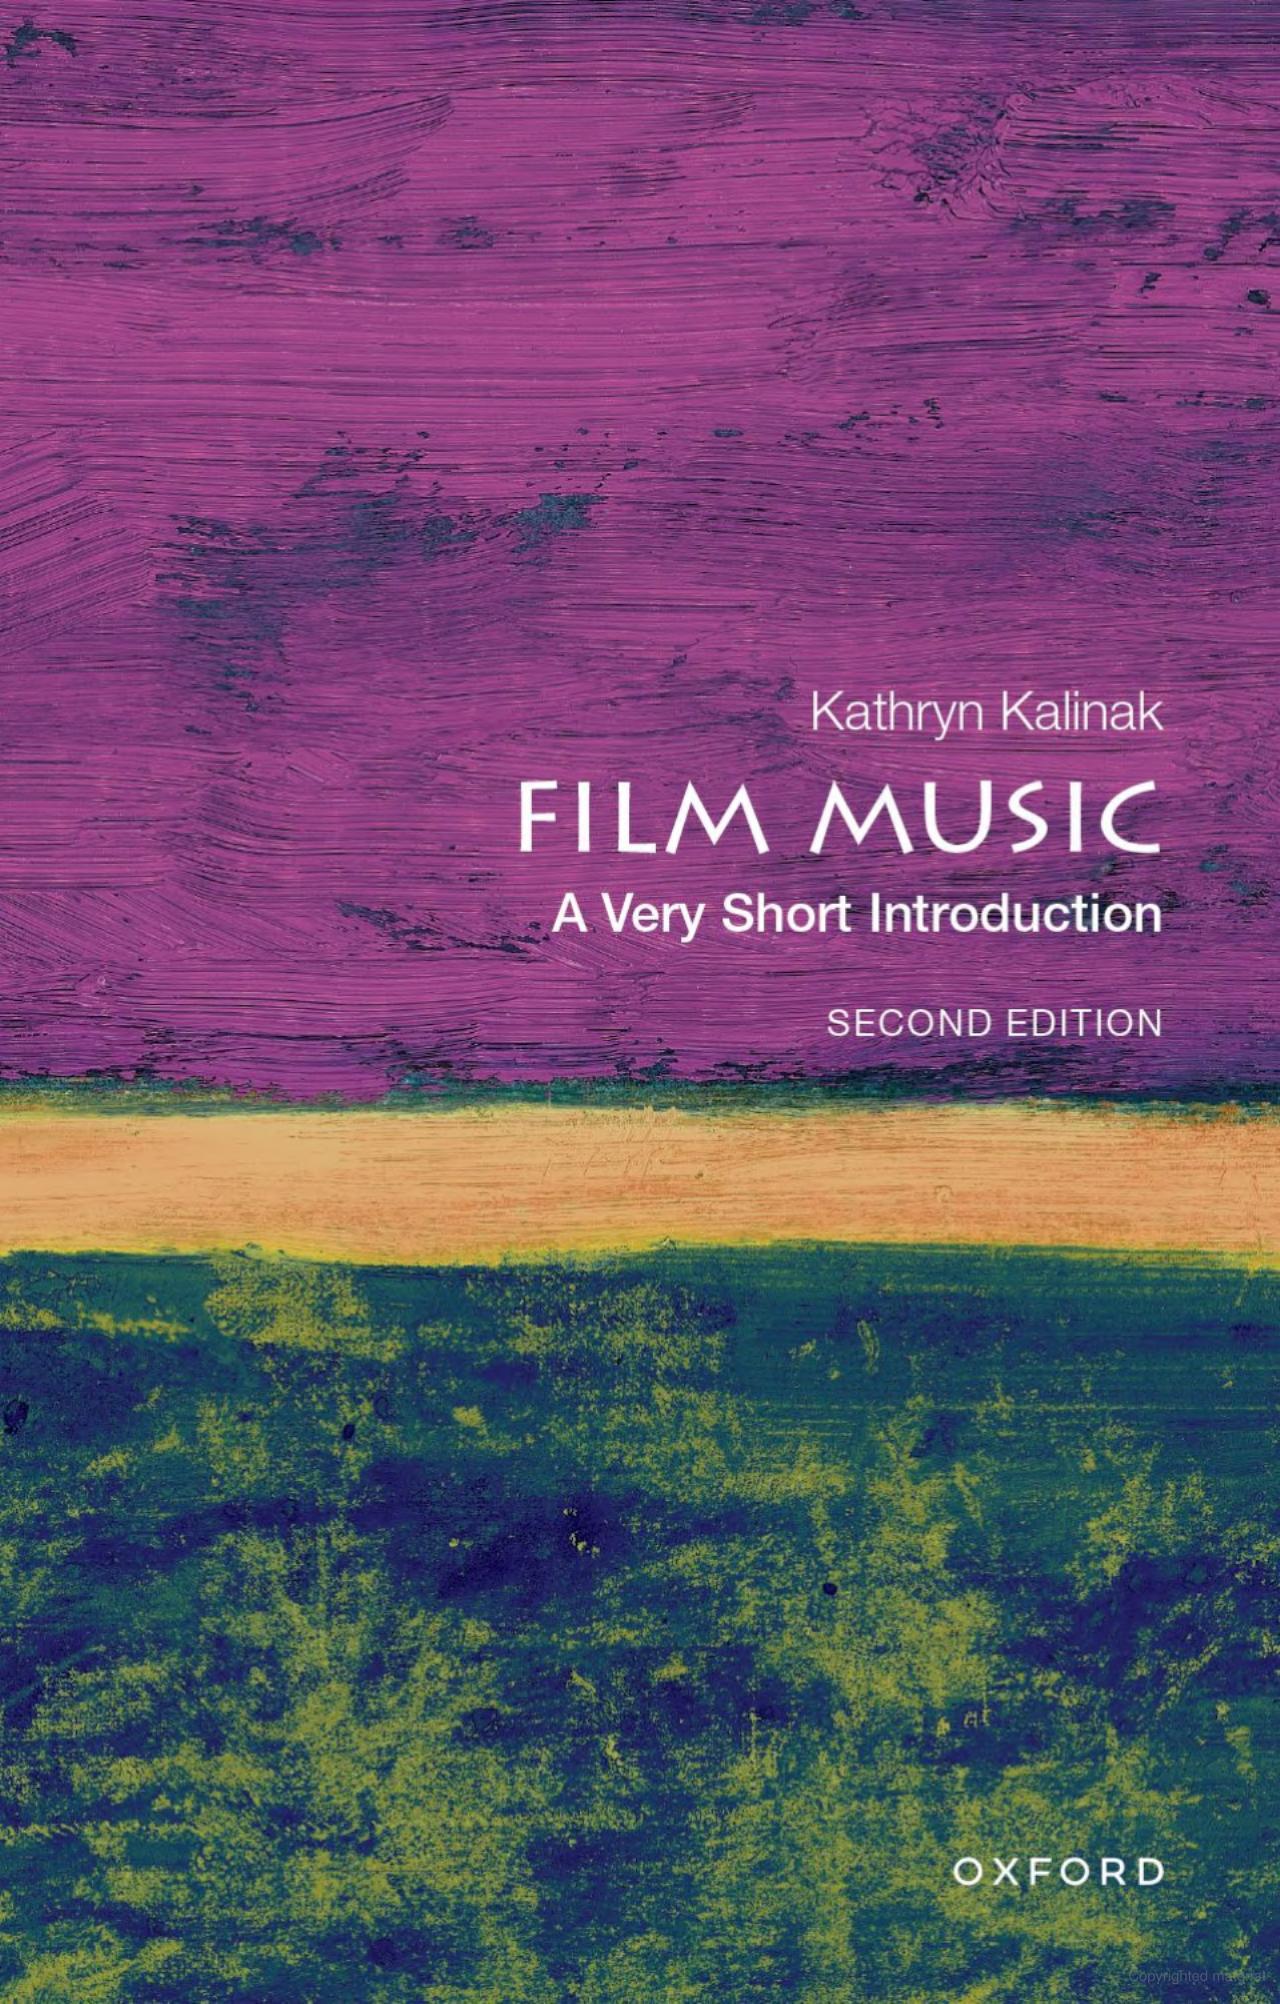 Film Music: A very short introduction, Second Edition